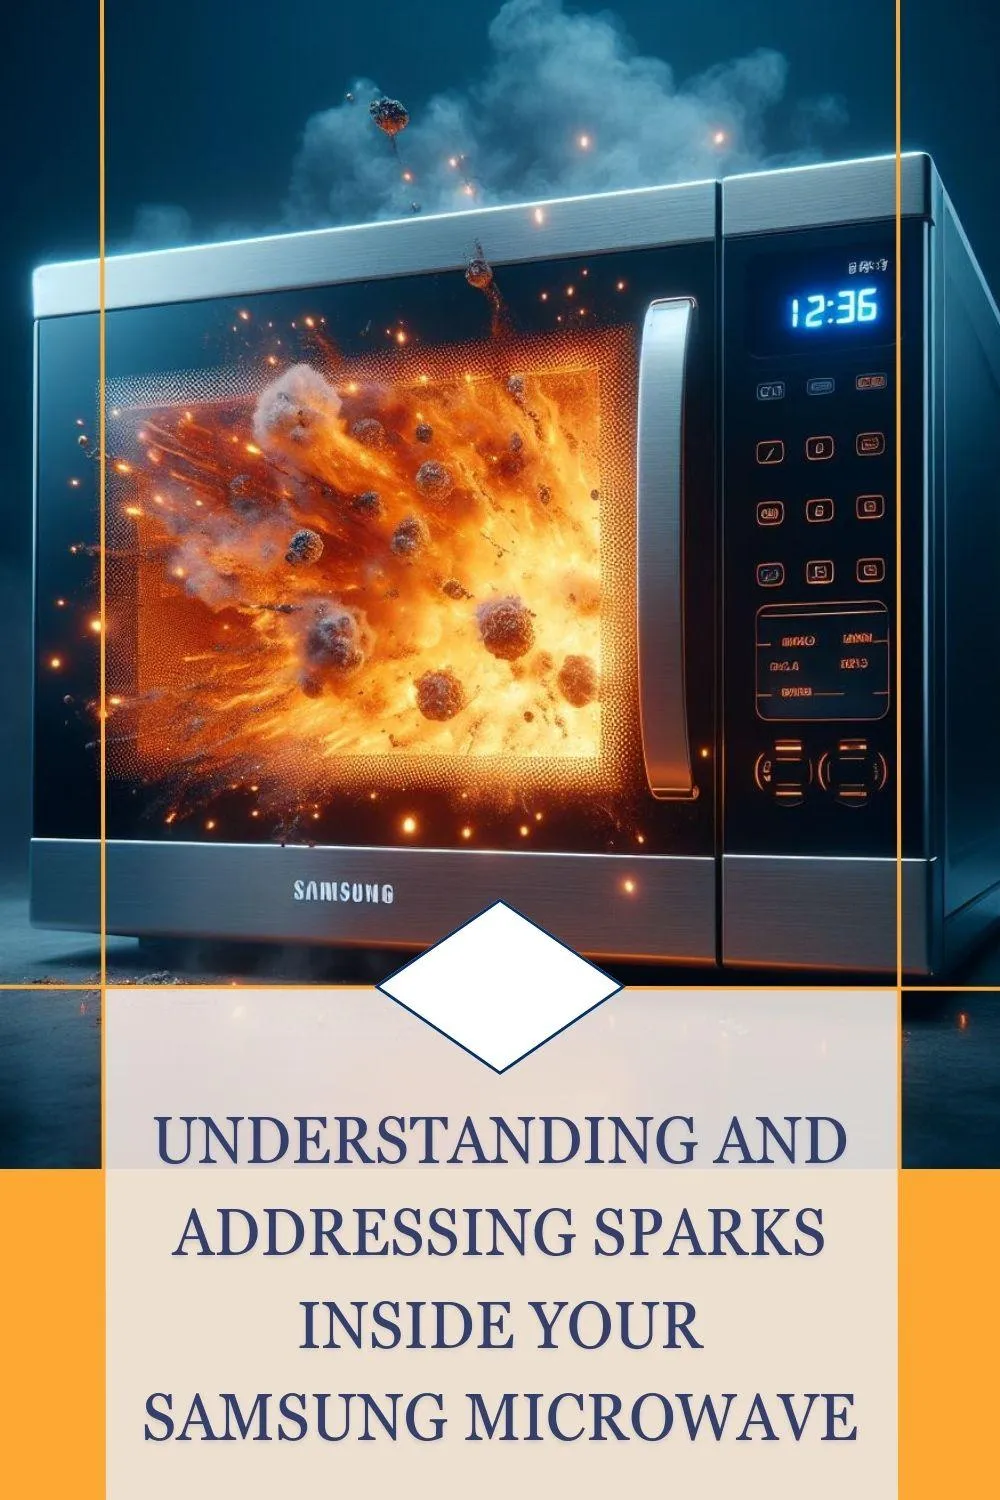 Understanding and Addressing Sparks Inside Your Samsung MicrowaveSamsung microwaves are renowned for their innovative features and advanced technology, making them a popular choice for households globally. However, encountering sparks inside your microwave can be alarming and raise questions about safety and the well-being of your appliance. 